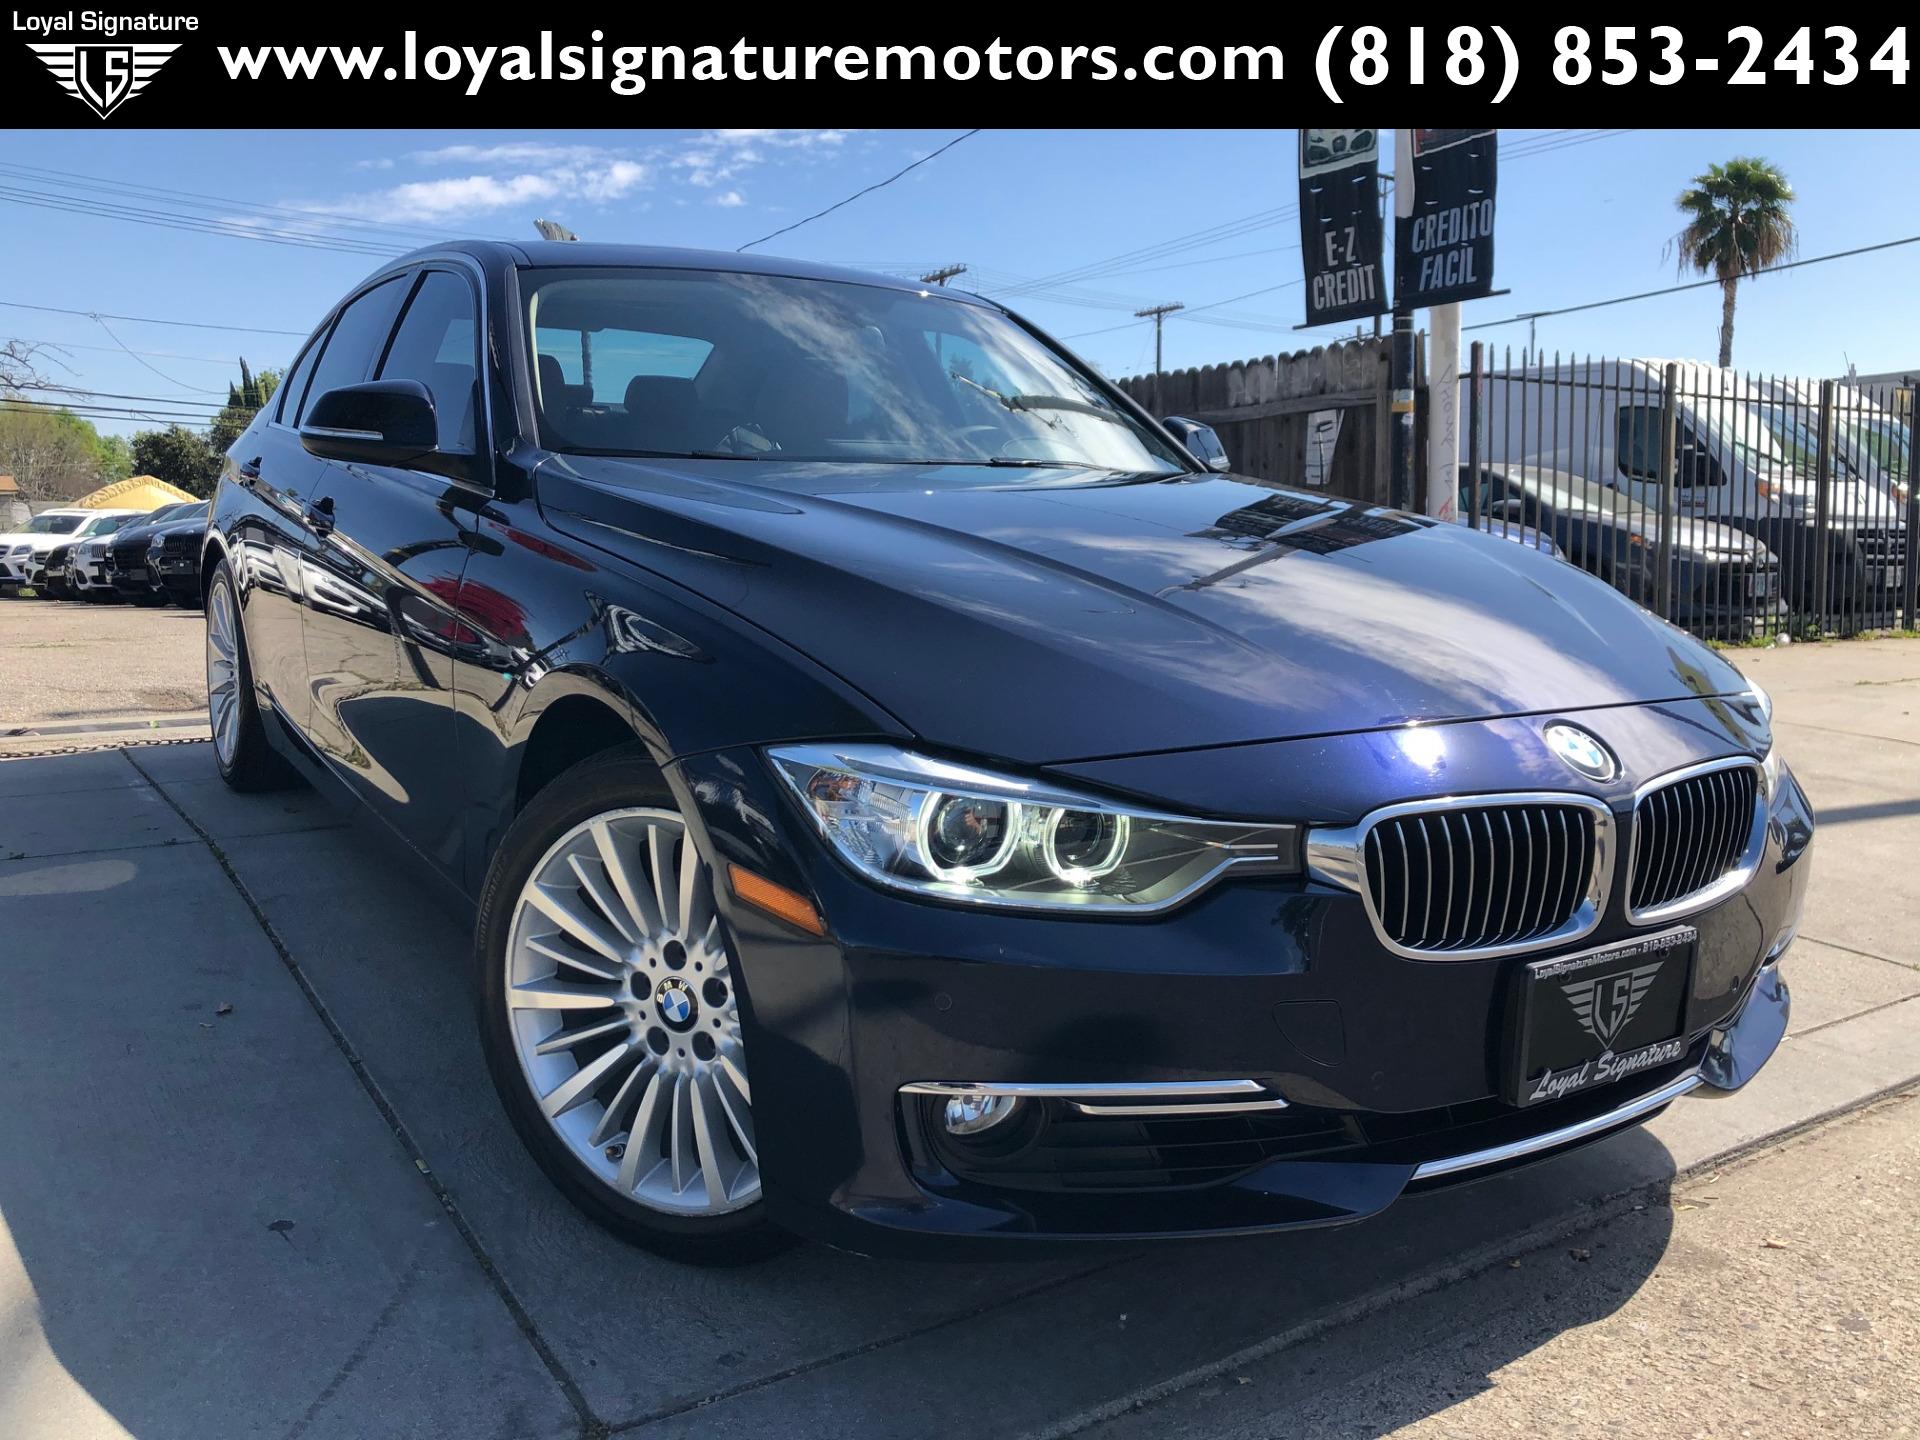 louter louter En Used 2014 BMW 3 Series 328i For Sale ($13,995) | Loyal Signature Motors Inc  Stock #202063